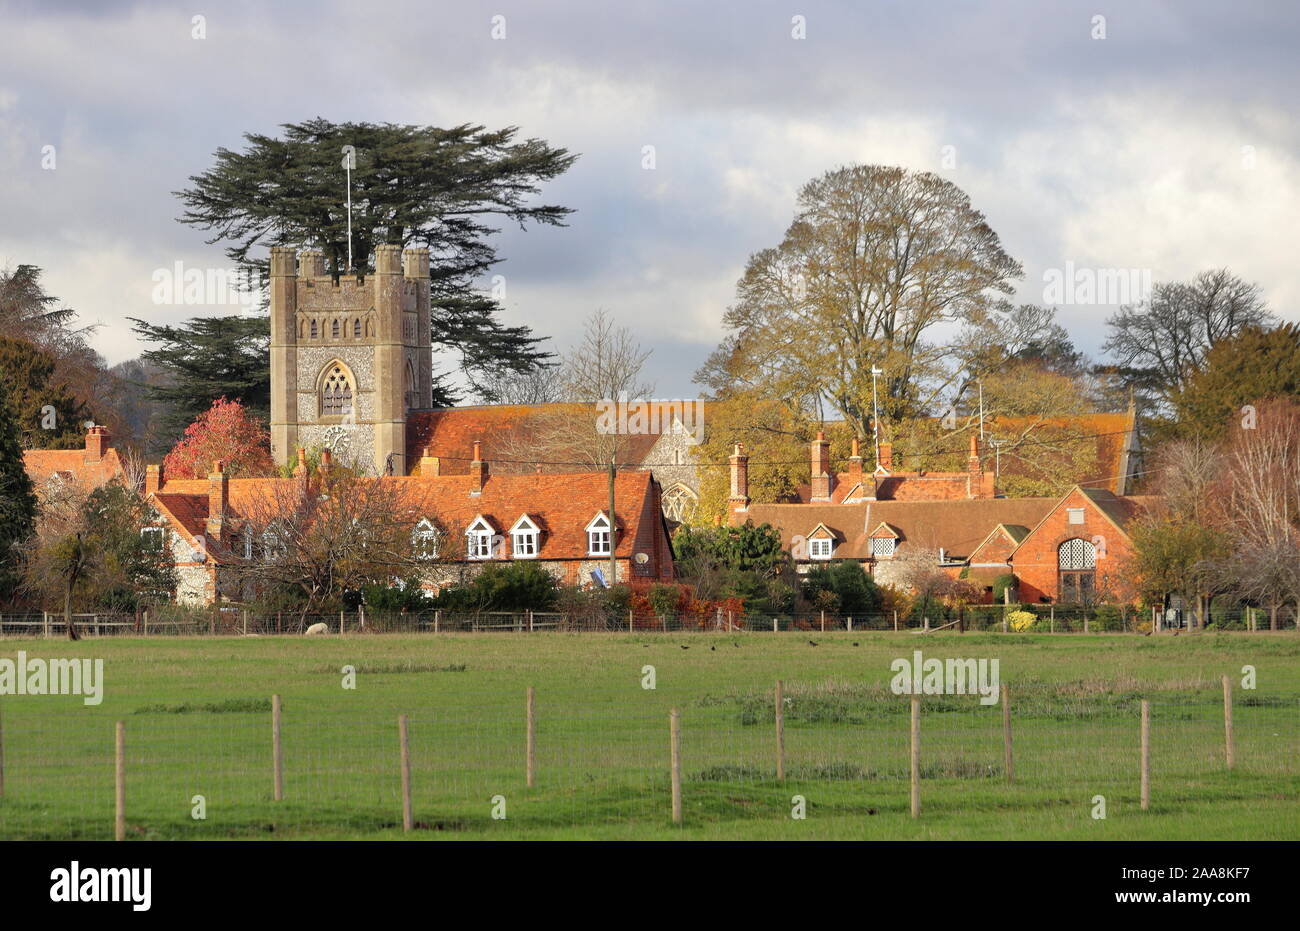 The English Village of Hambleden with church in the background Stock Photo